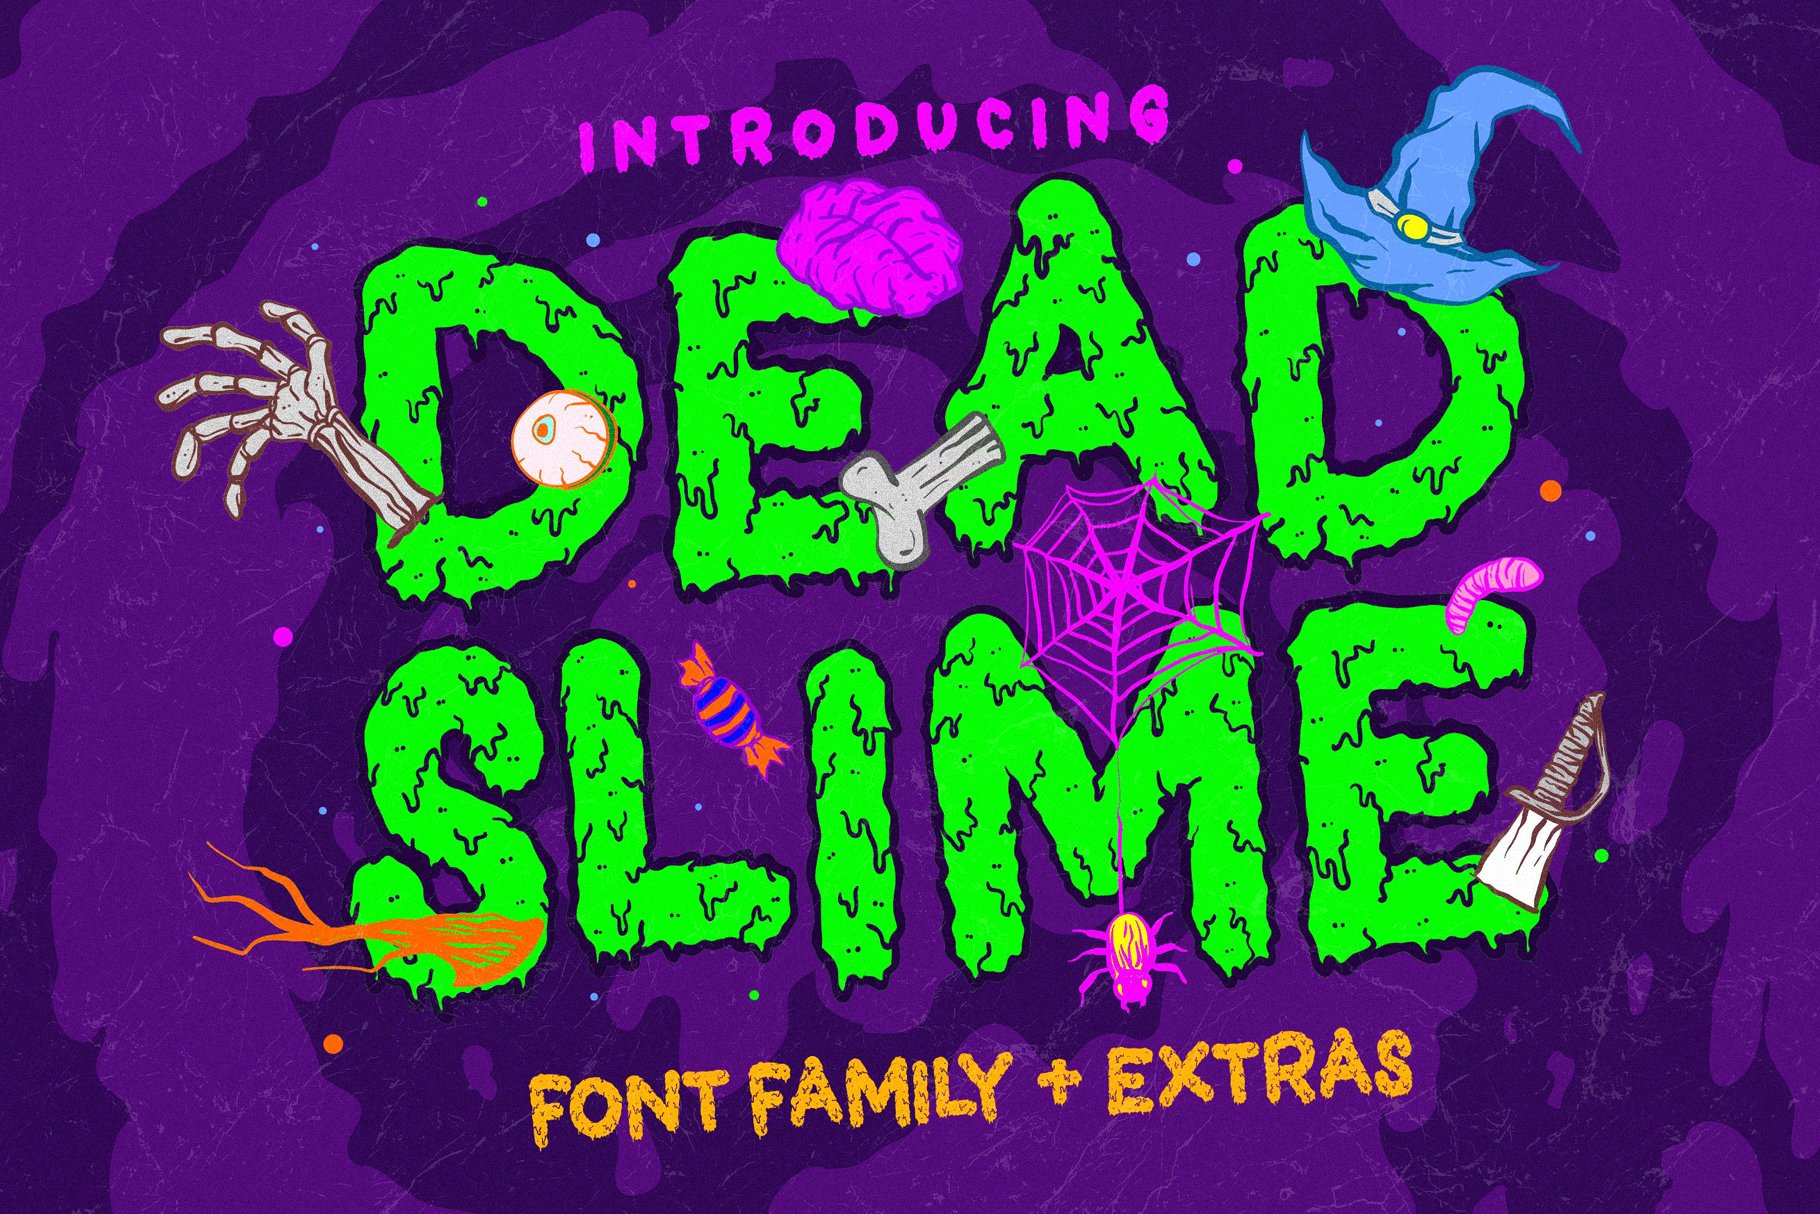 Dead Slime Font + Extras cover image.